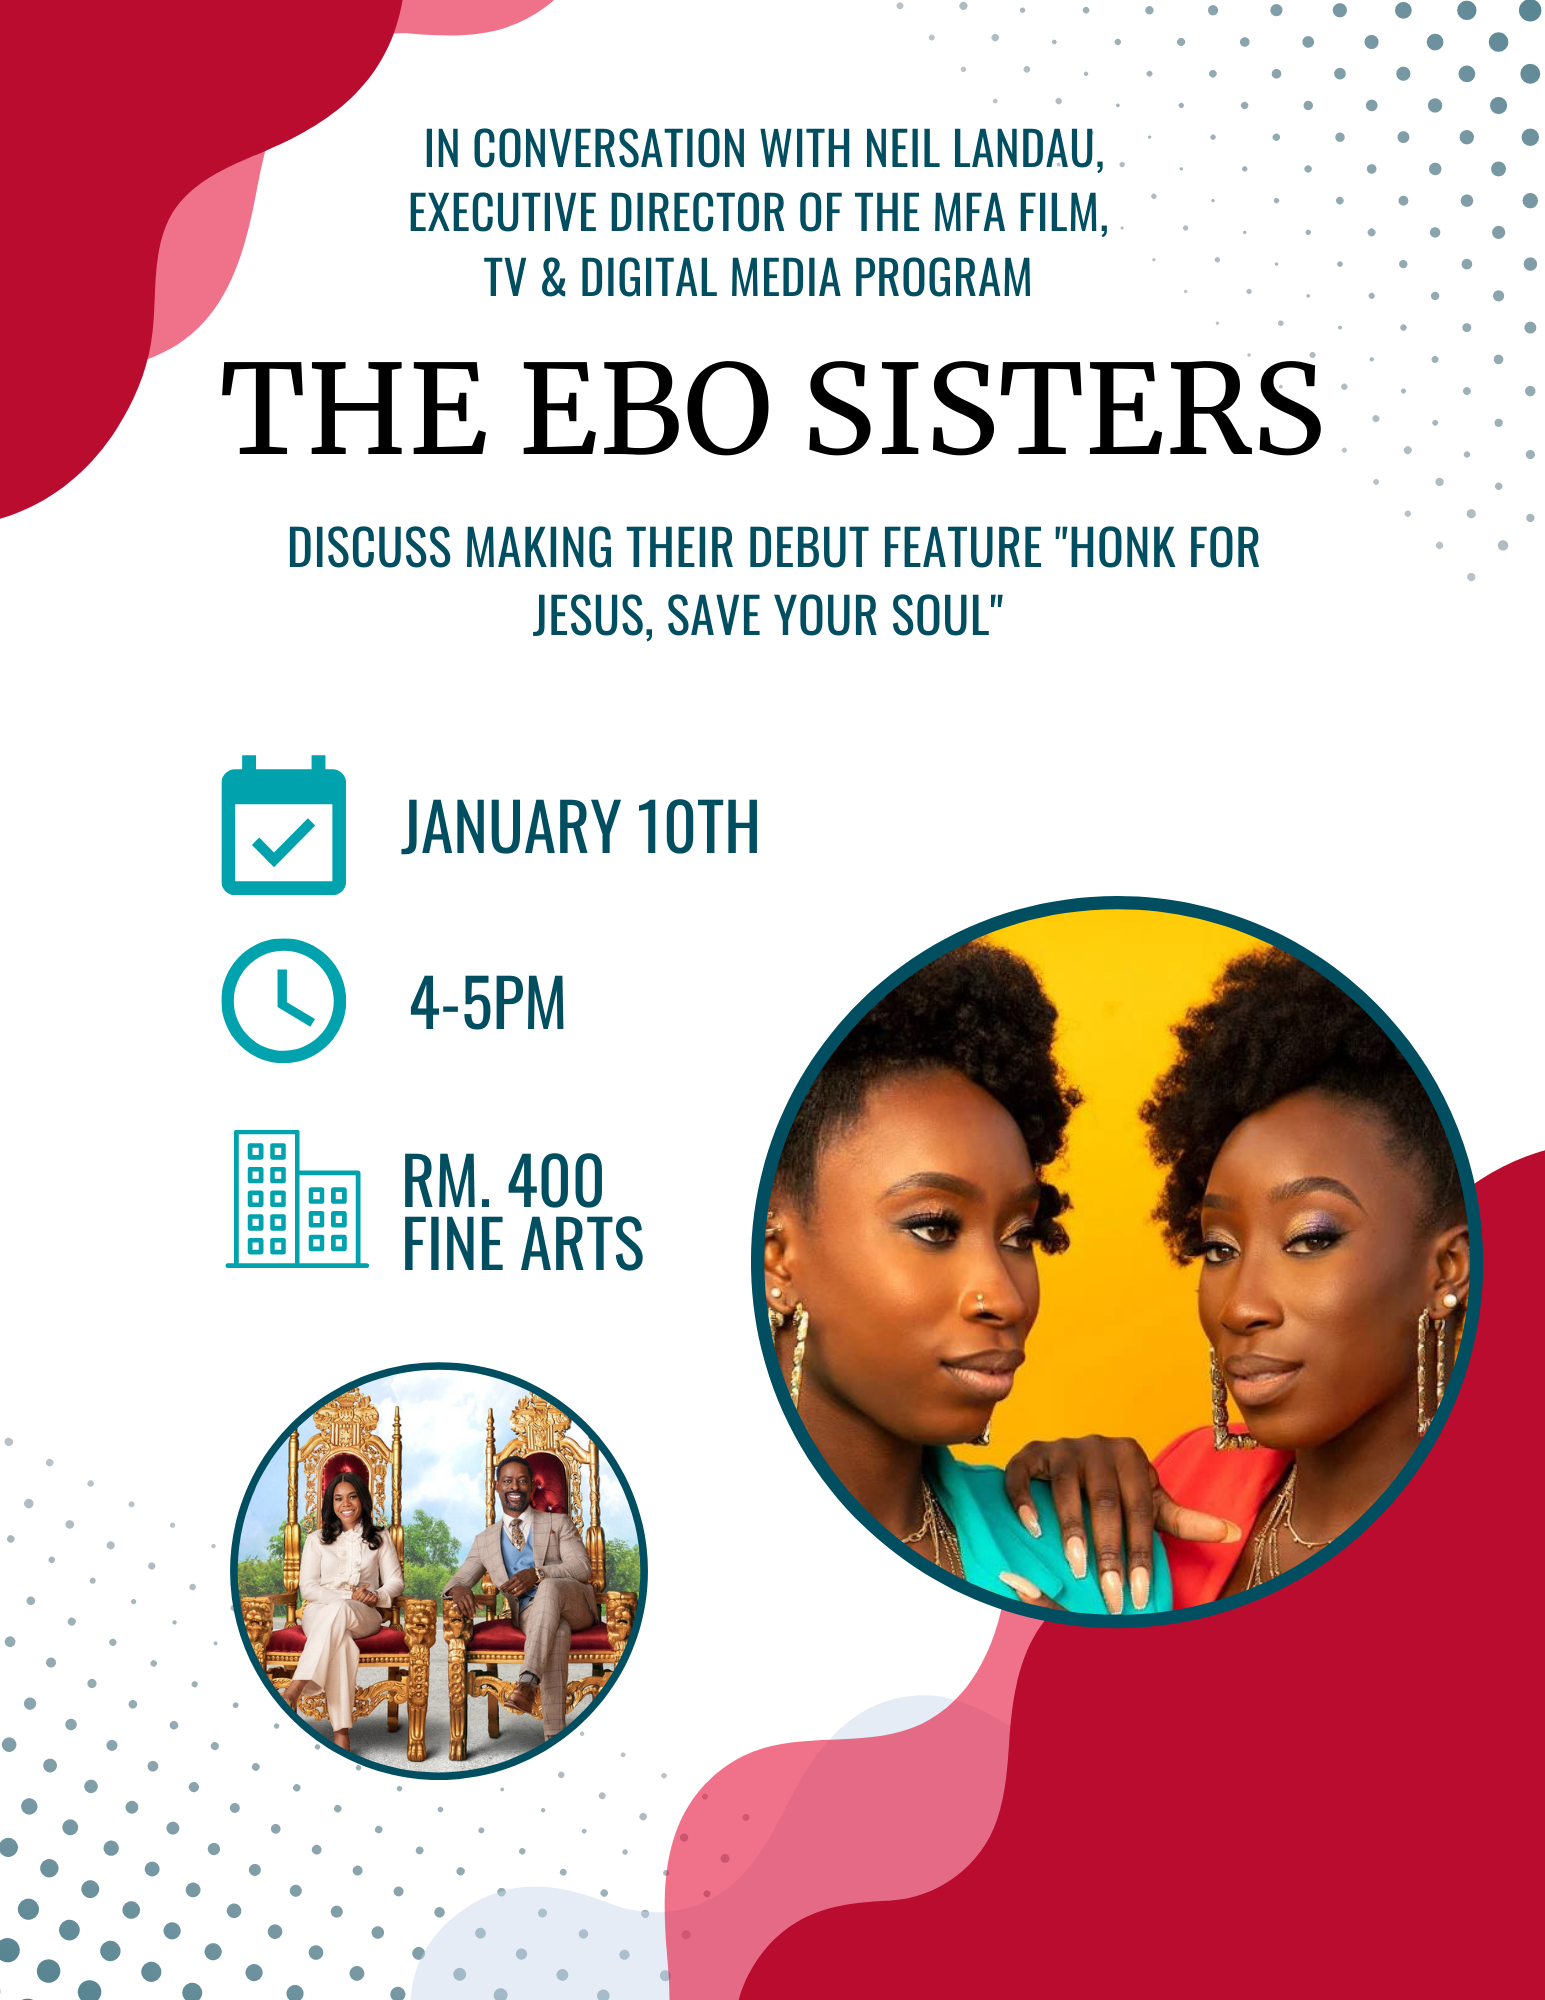 |A flyer for the Ebo Sisters visit.|A flyer for the Ebo Sisters visit.